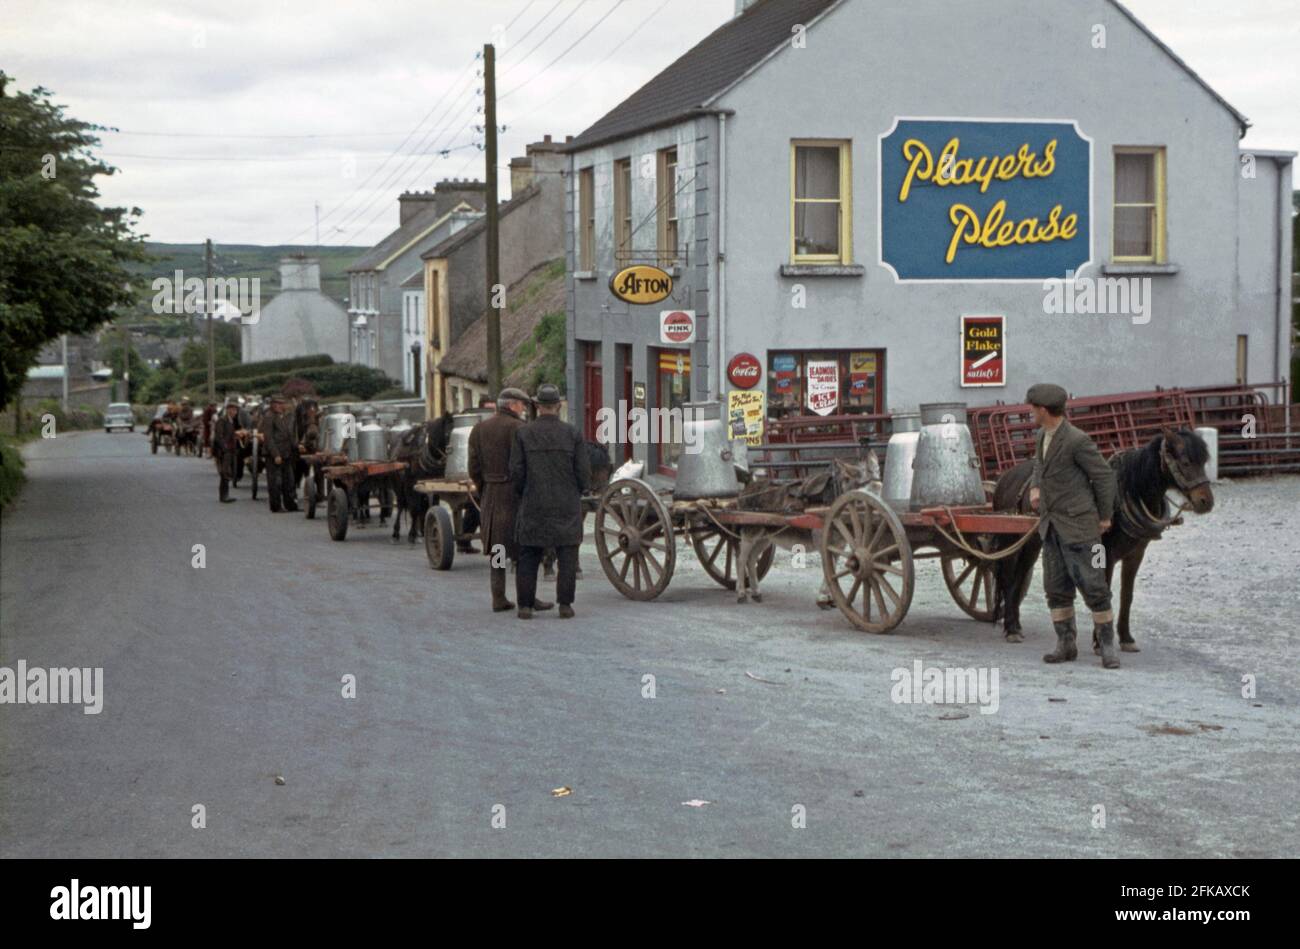 A queue is forming outside the local dairy in Church Street on the outskirts of Ennistimon (Ennistymon or Inis Díomáin), County Clare, Ireland in the 1960s. The farmers have brought their milk for processing in churns by cart, pulled by horse or donkey. Donkeys were a common site on farms in Ireland. The store next to the dairy has a large Players cigarette advertising sign on the side wall. The site of the dairy is now a farm store. This image is from an old amateur colour transparency – a vintage 1960s photograph. Stock Photo